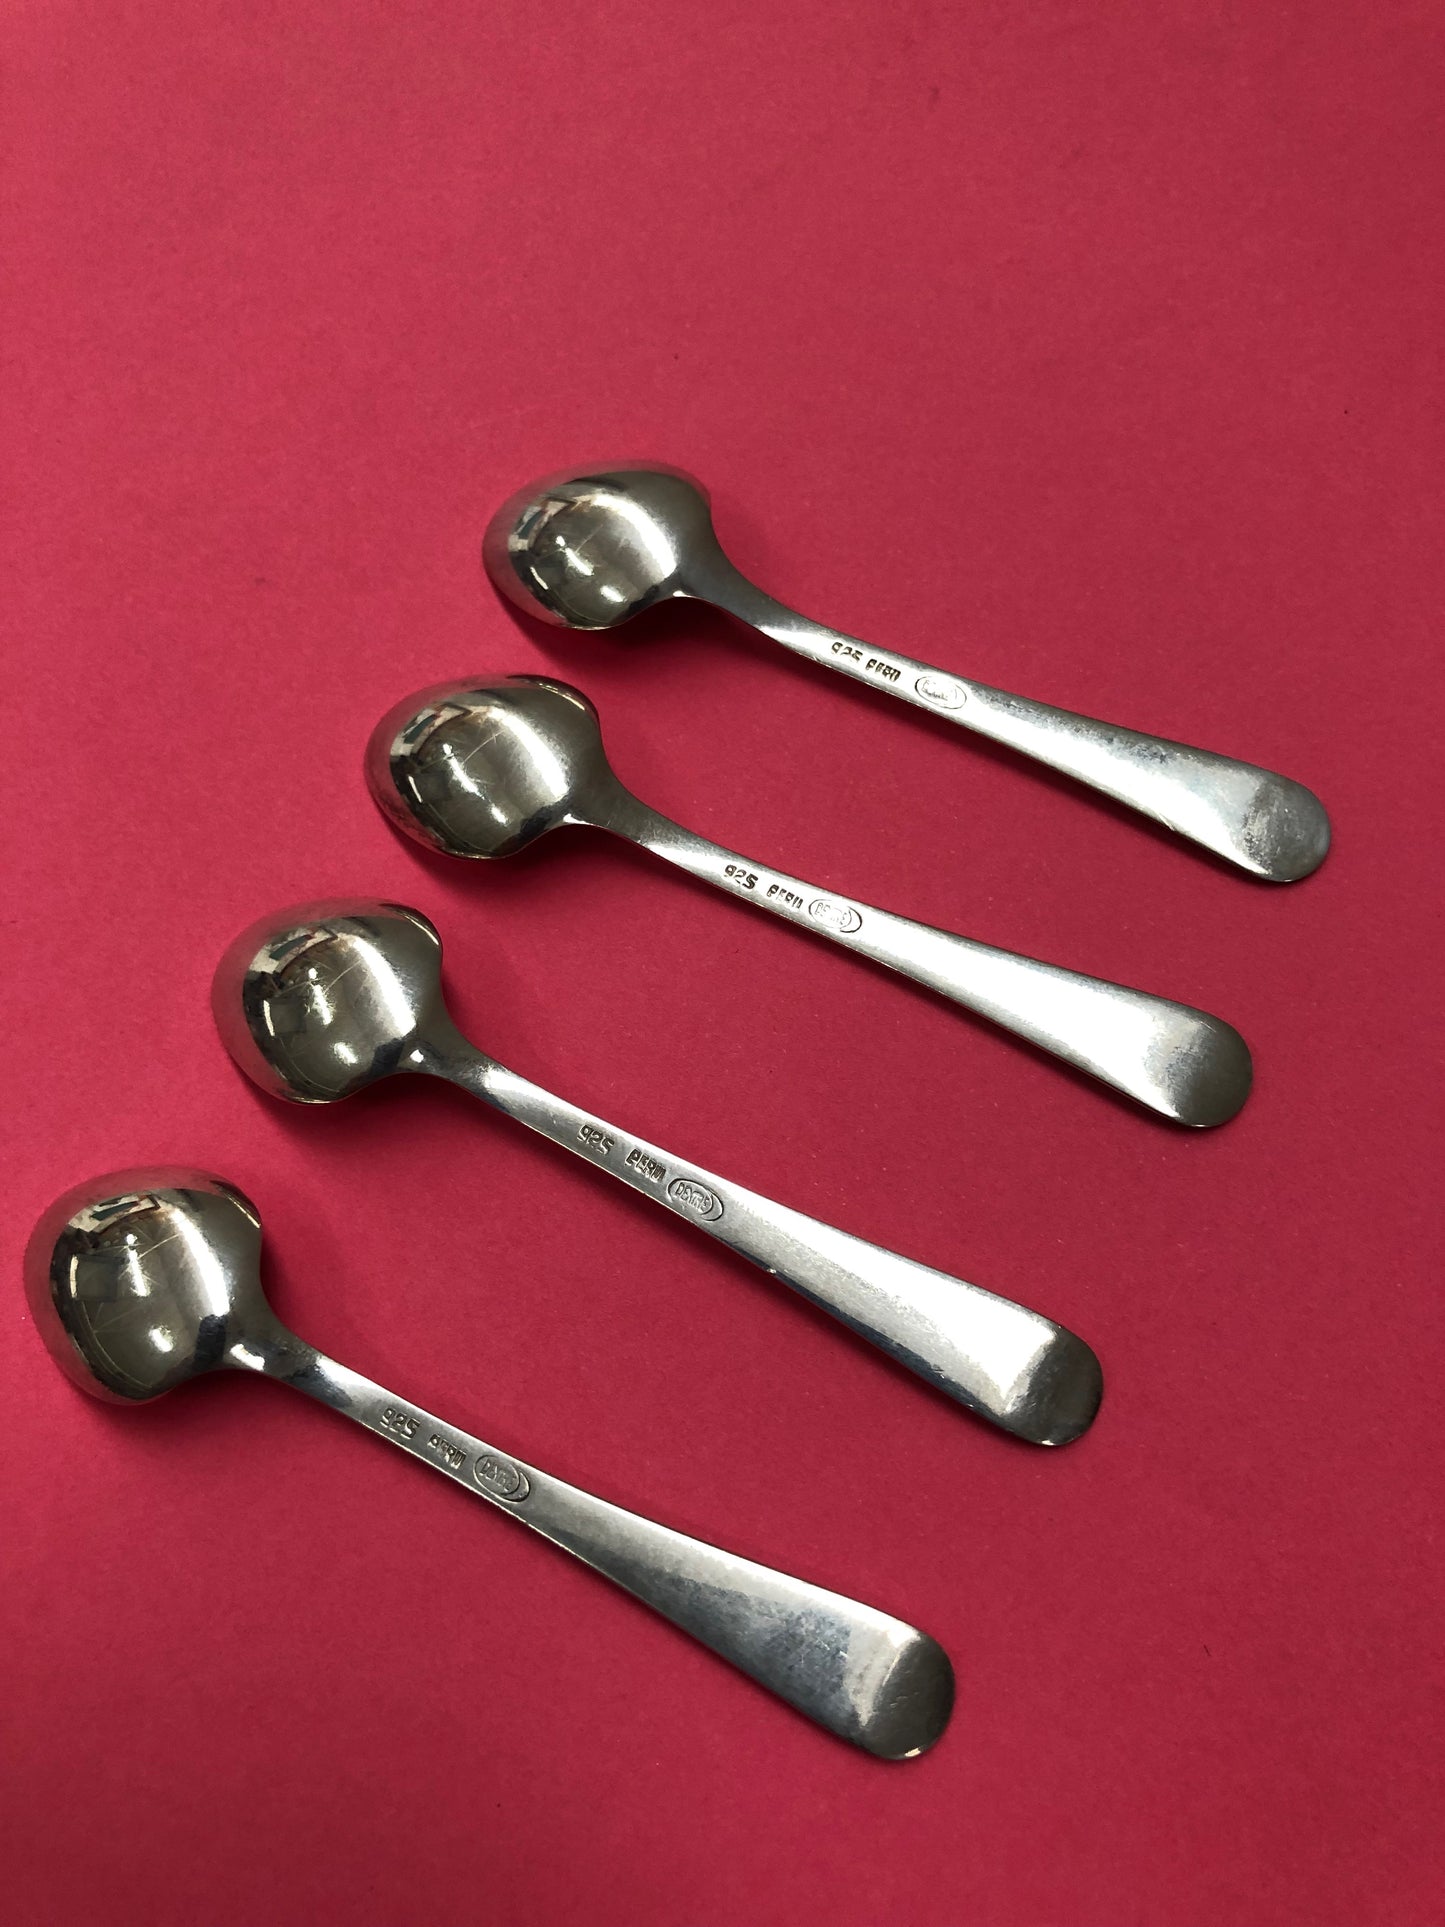 The Headhunter Sonny - Vintage Silver Coffee Spoons